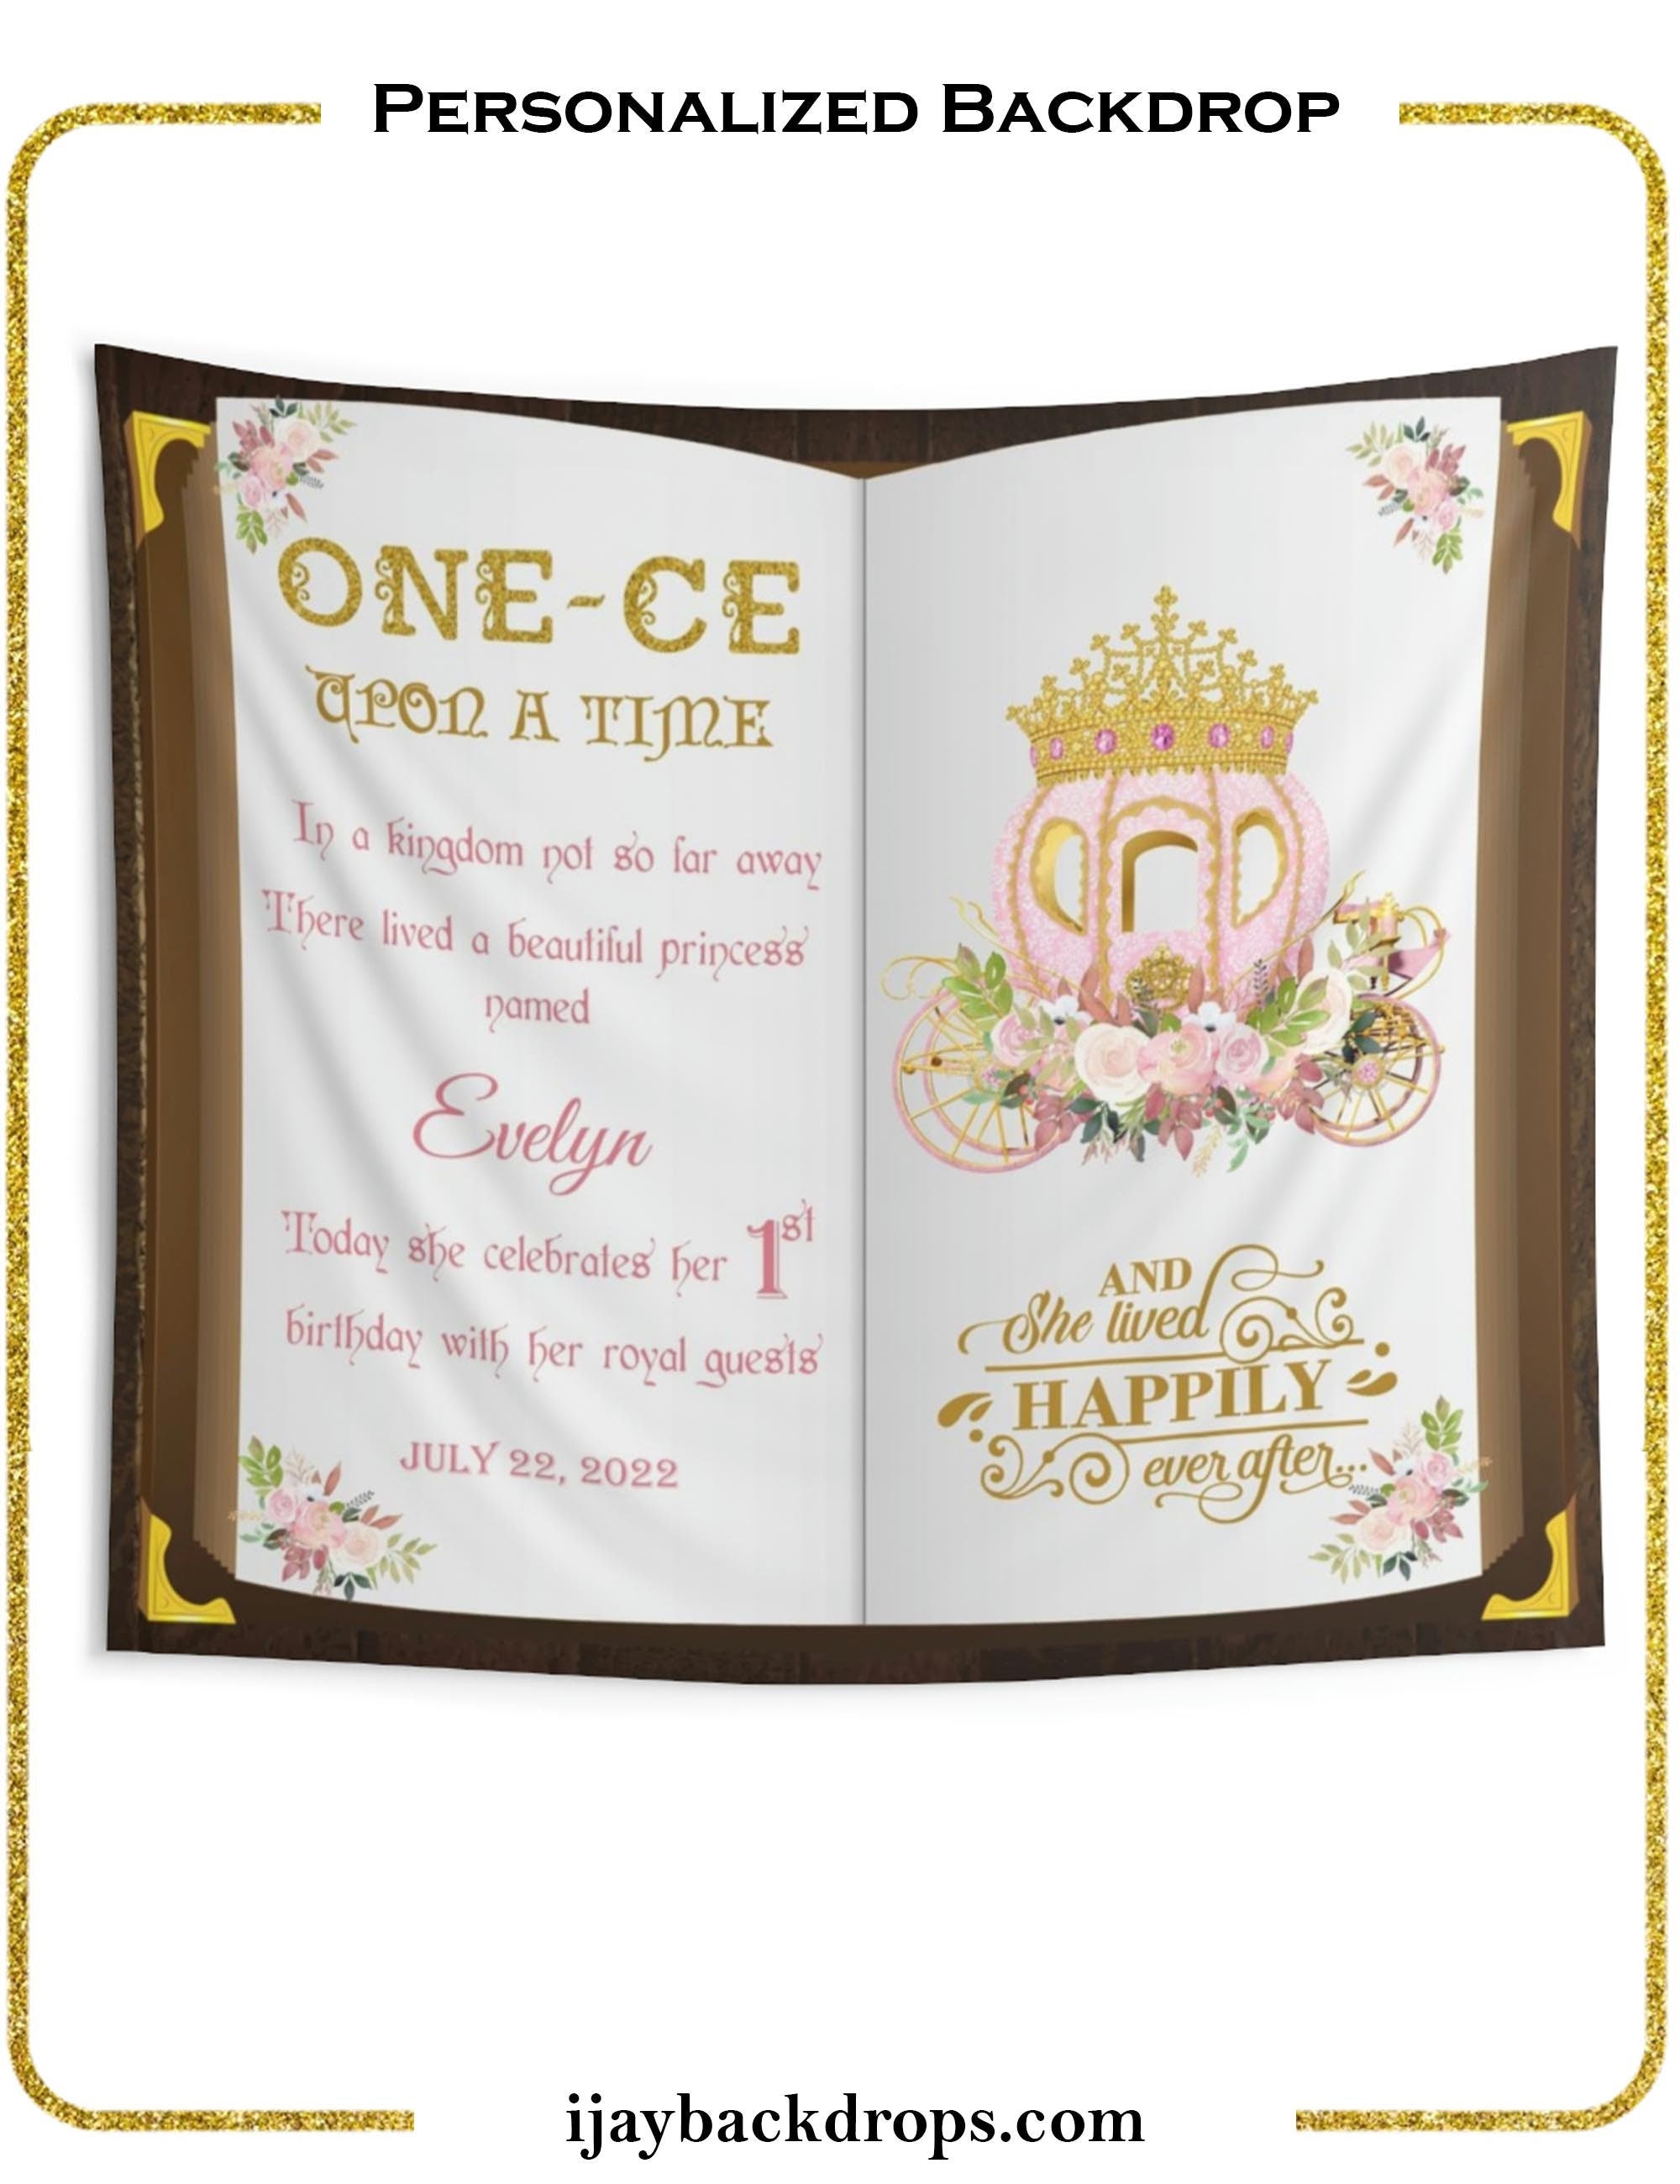 One-ce upon a time First Birthday Princess Backdrop